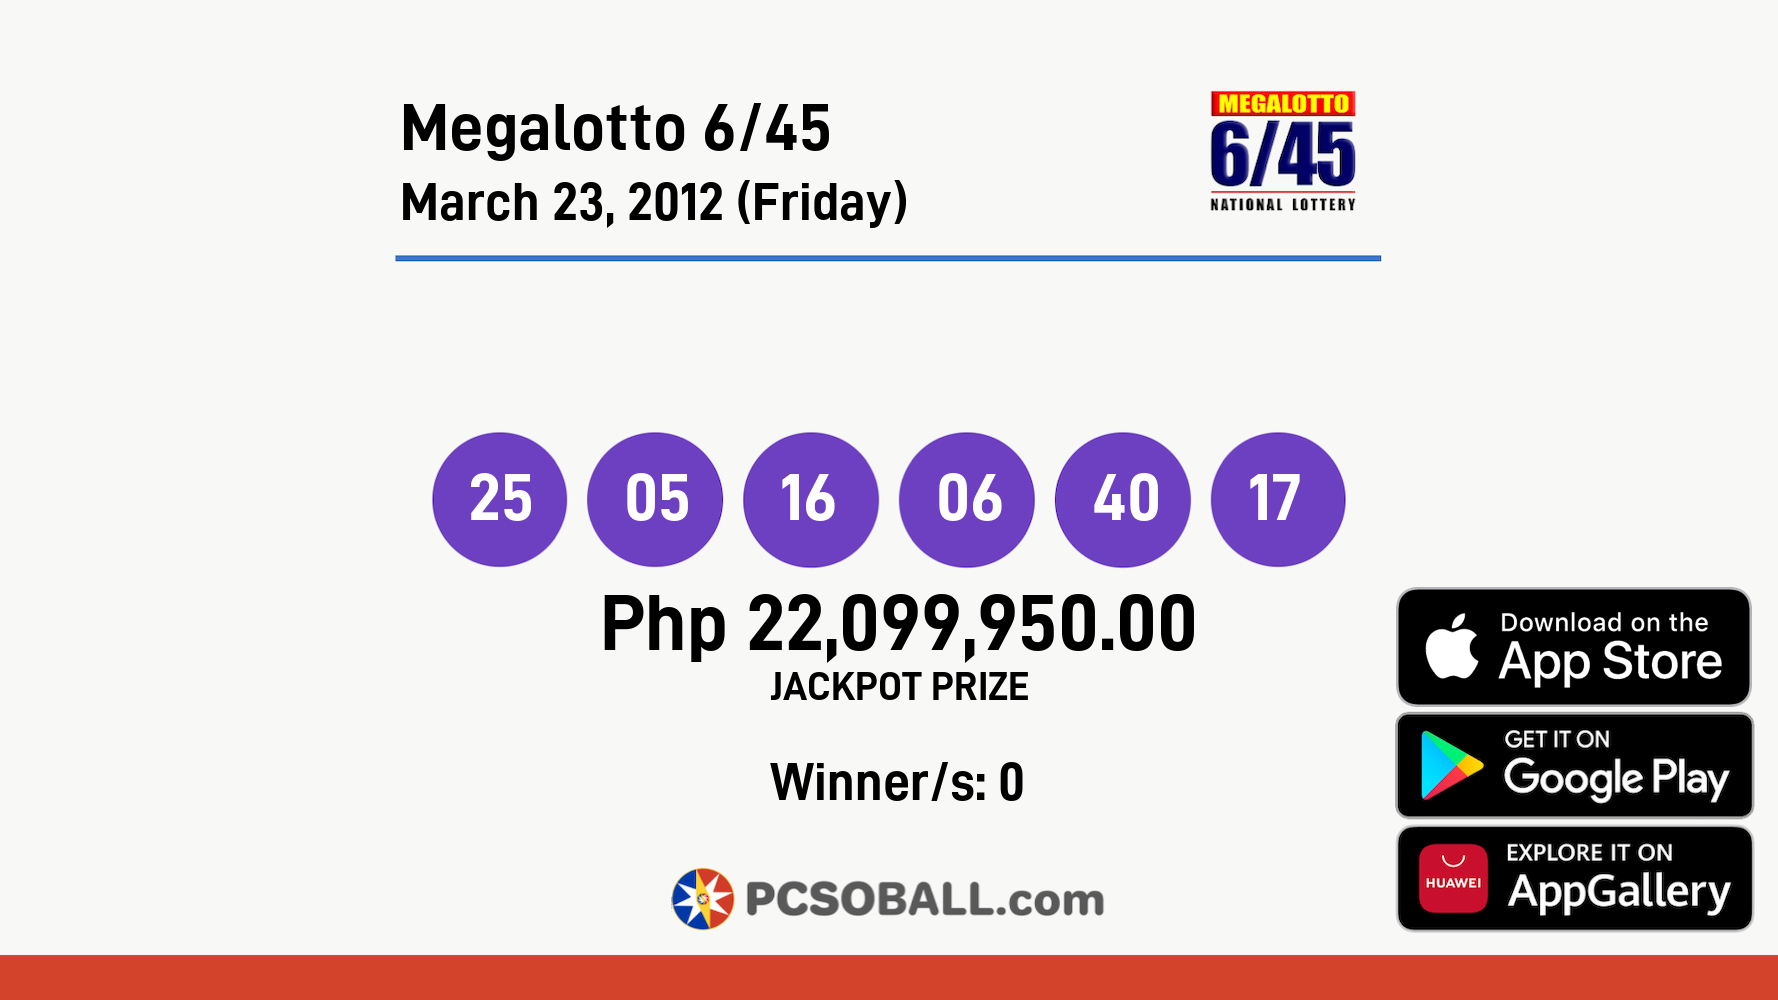 Megalotto 6/45 March 23, 2012 (Friday) Result